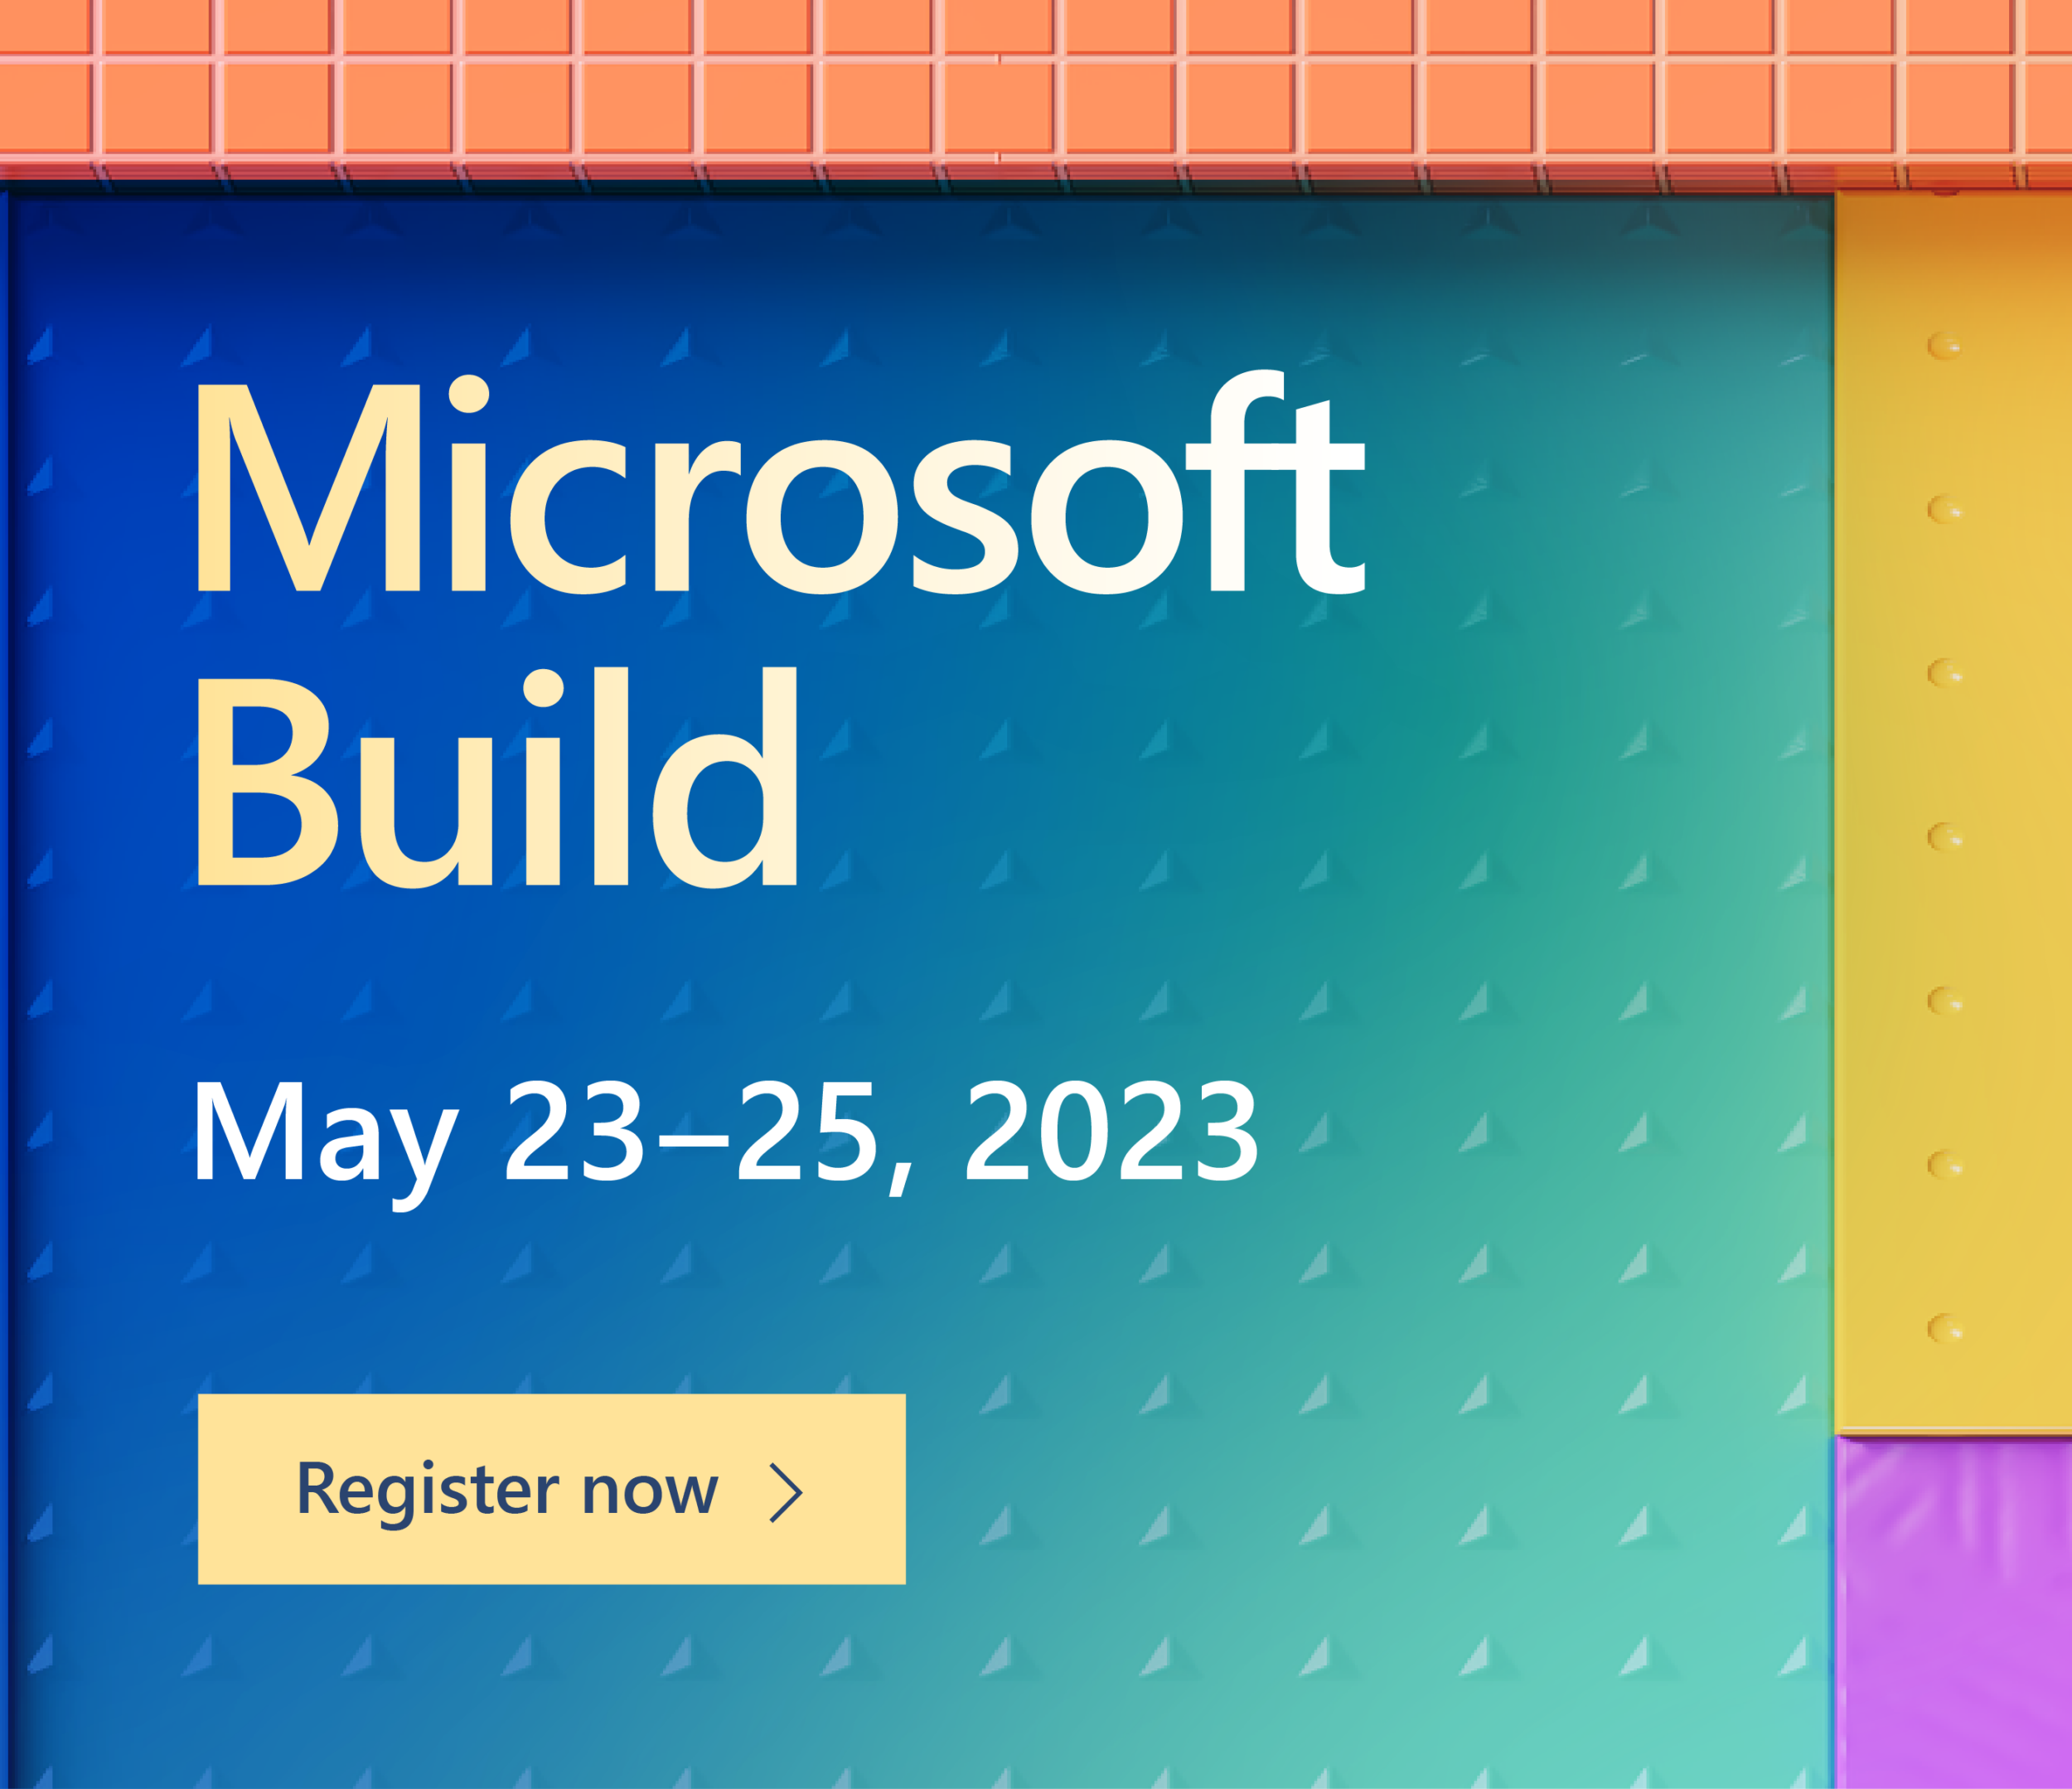 Azure Cosmos DB at Build 2023: Everything you need to know